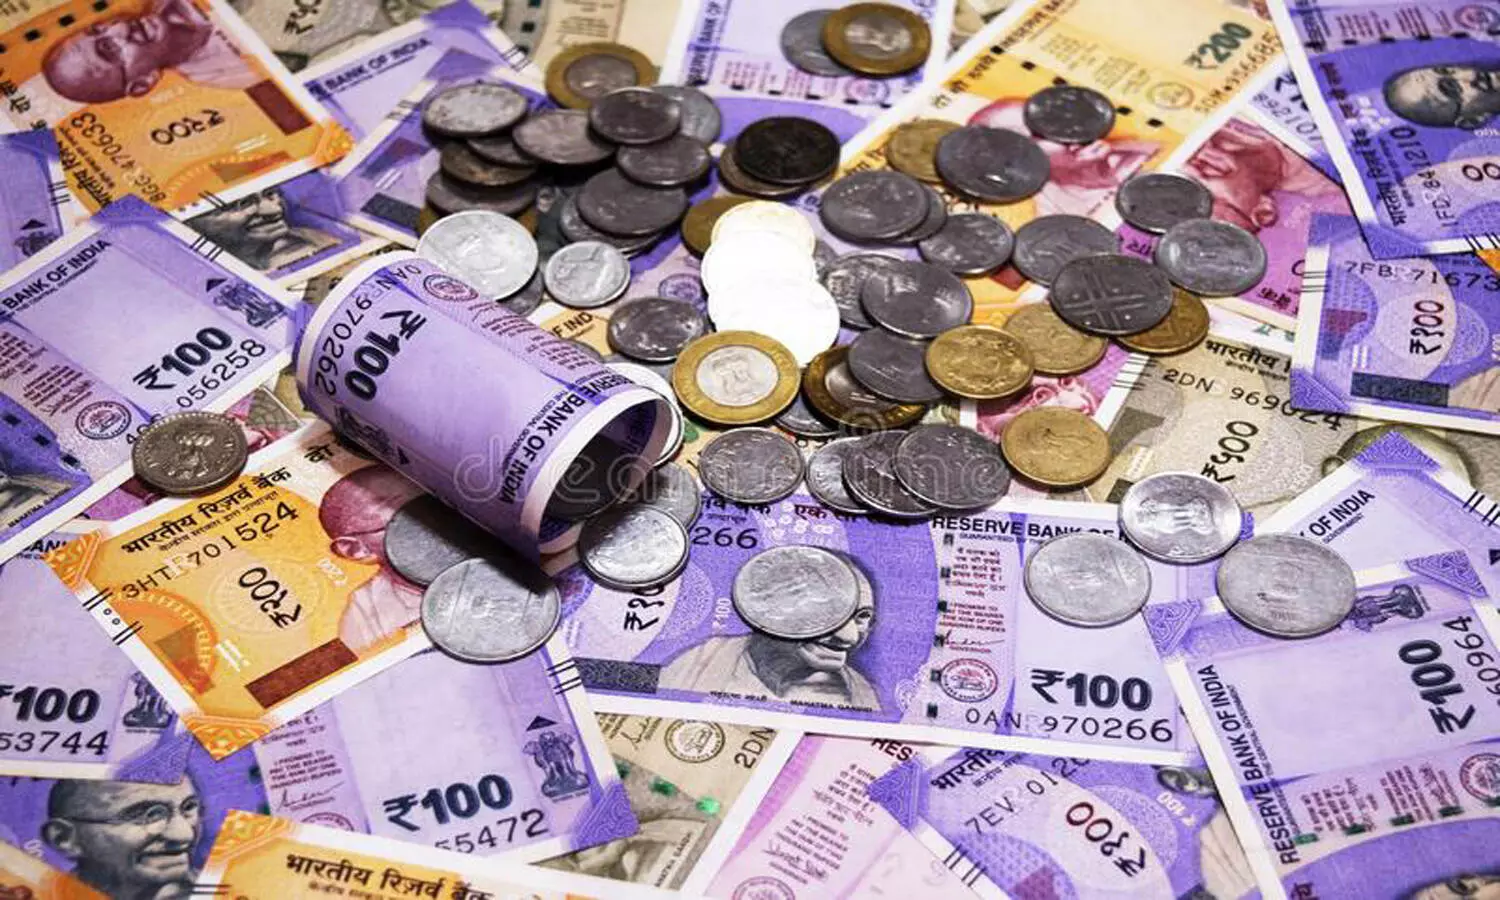 Did you know from what Indian currency is made of? Read details